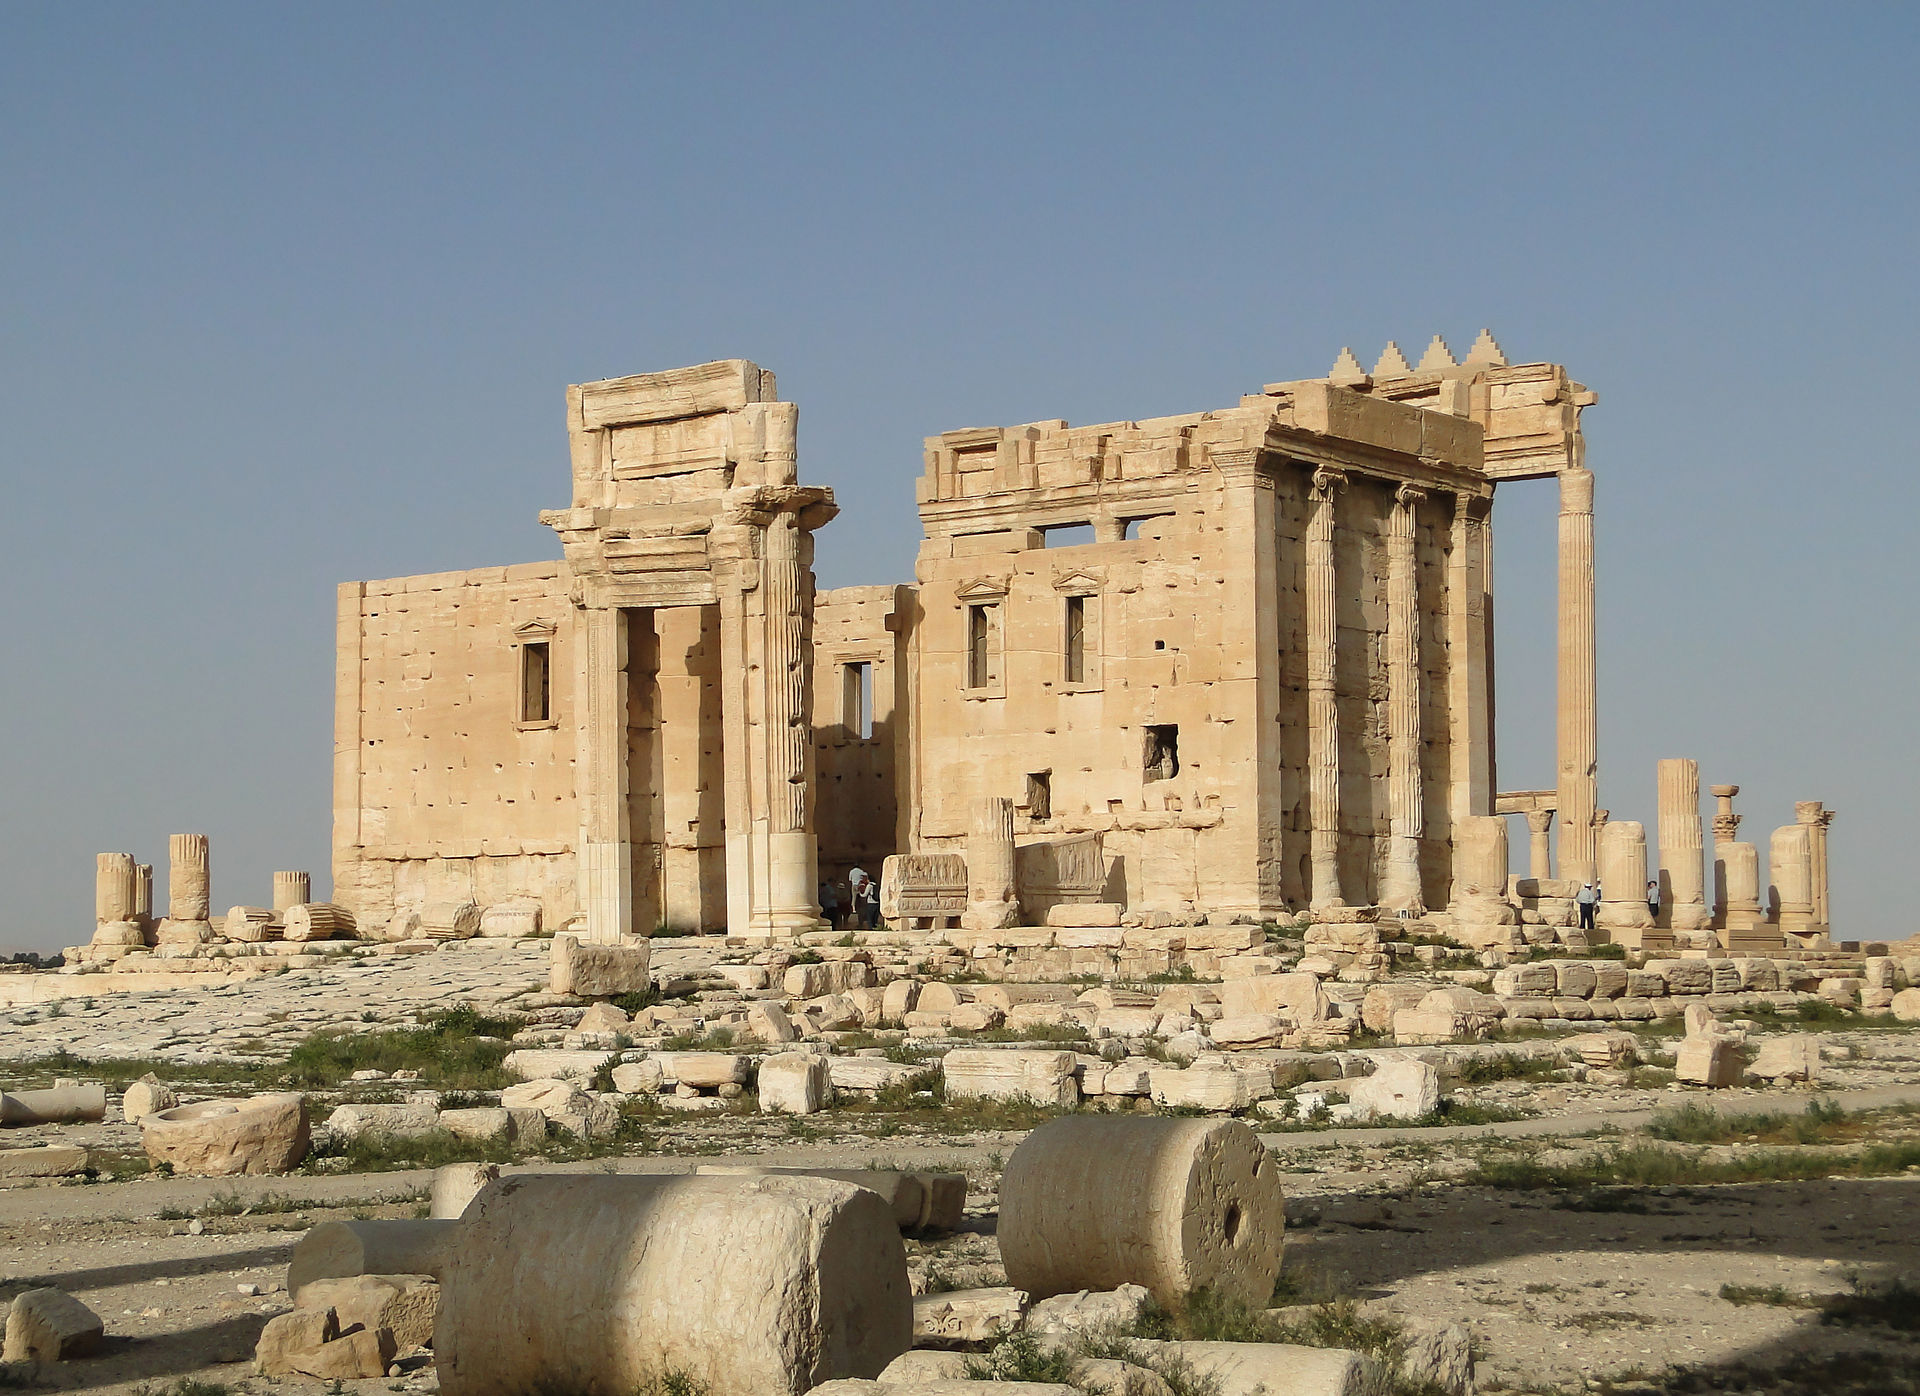 Syrian official: Amount of damage at Palmyra temple unclear